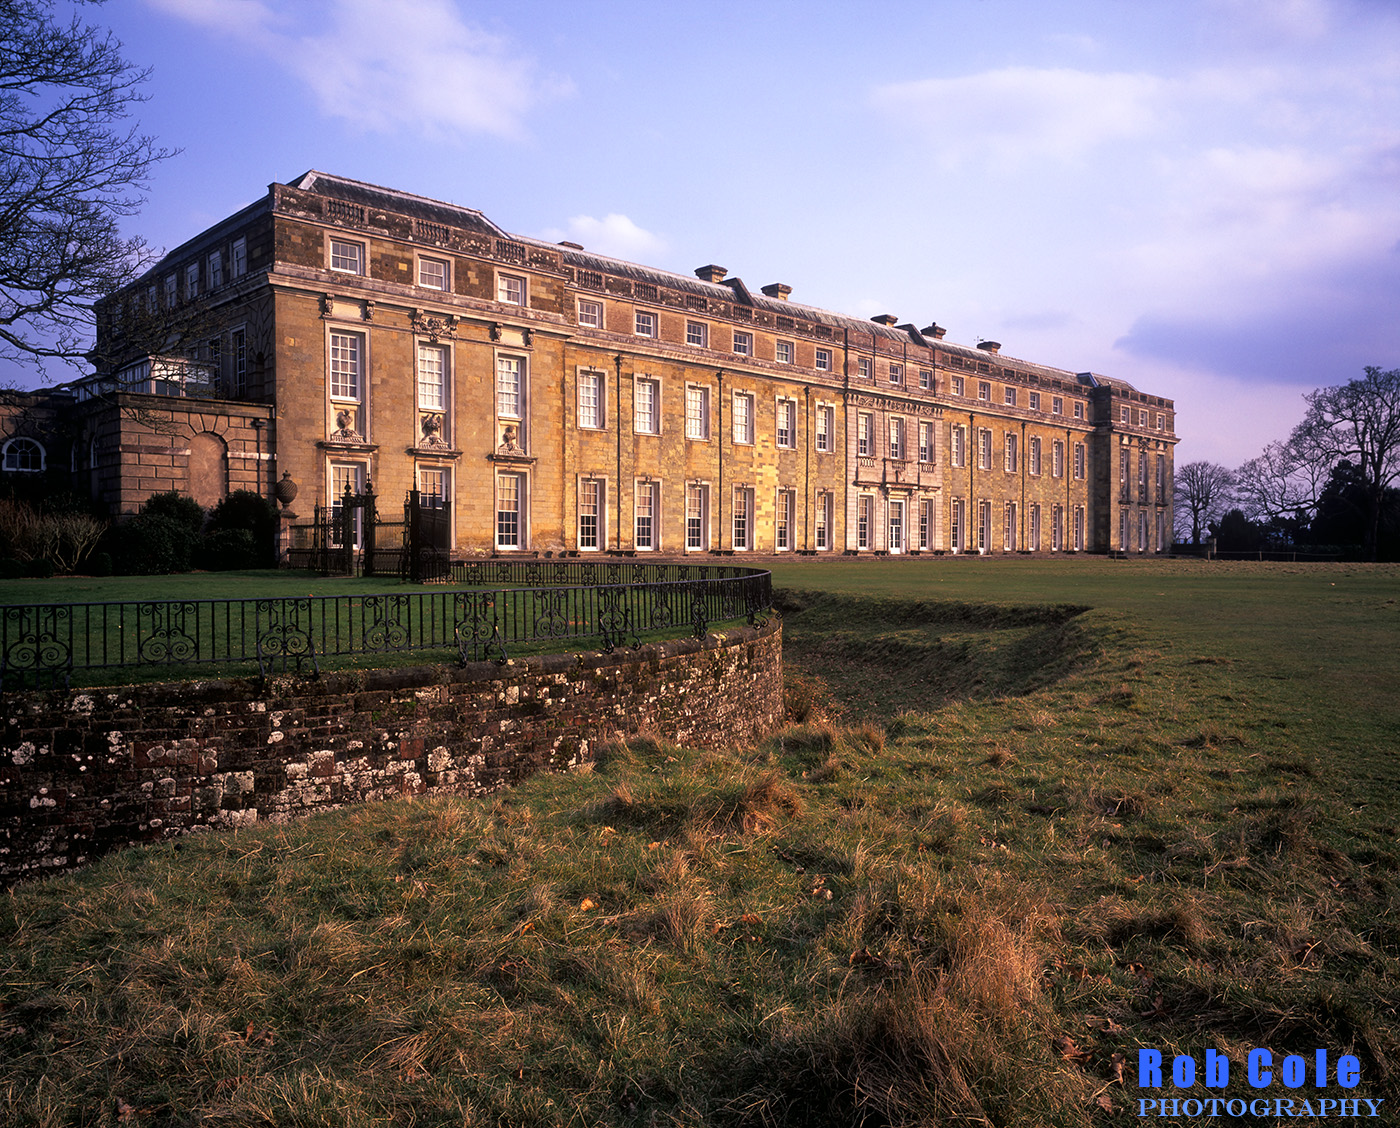 A late winter view of the North facing frontage of Petworth House